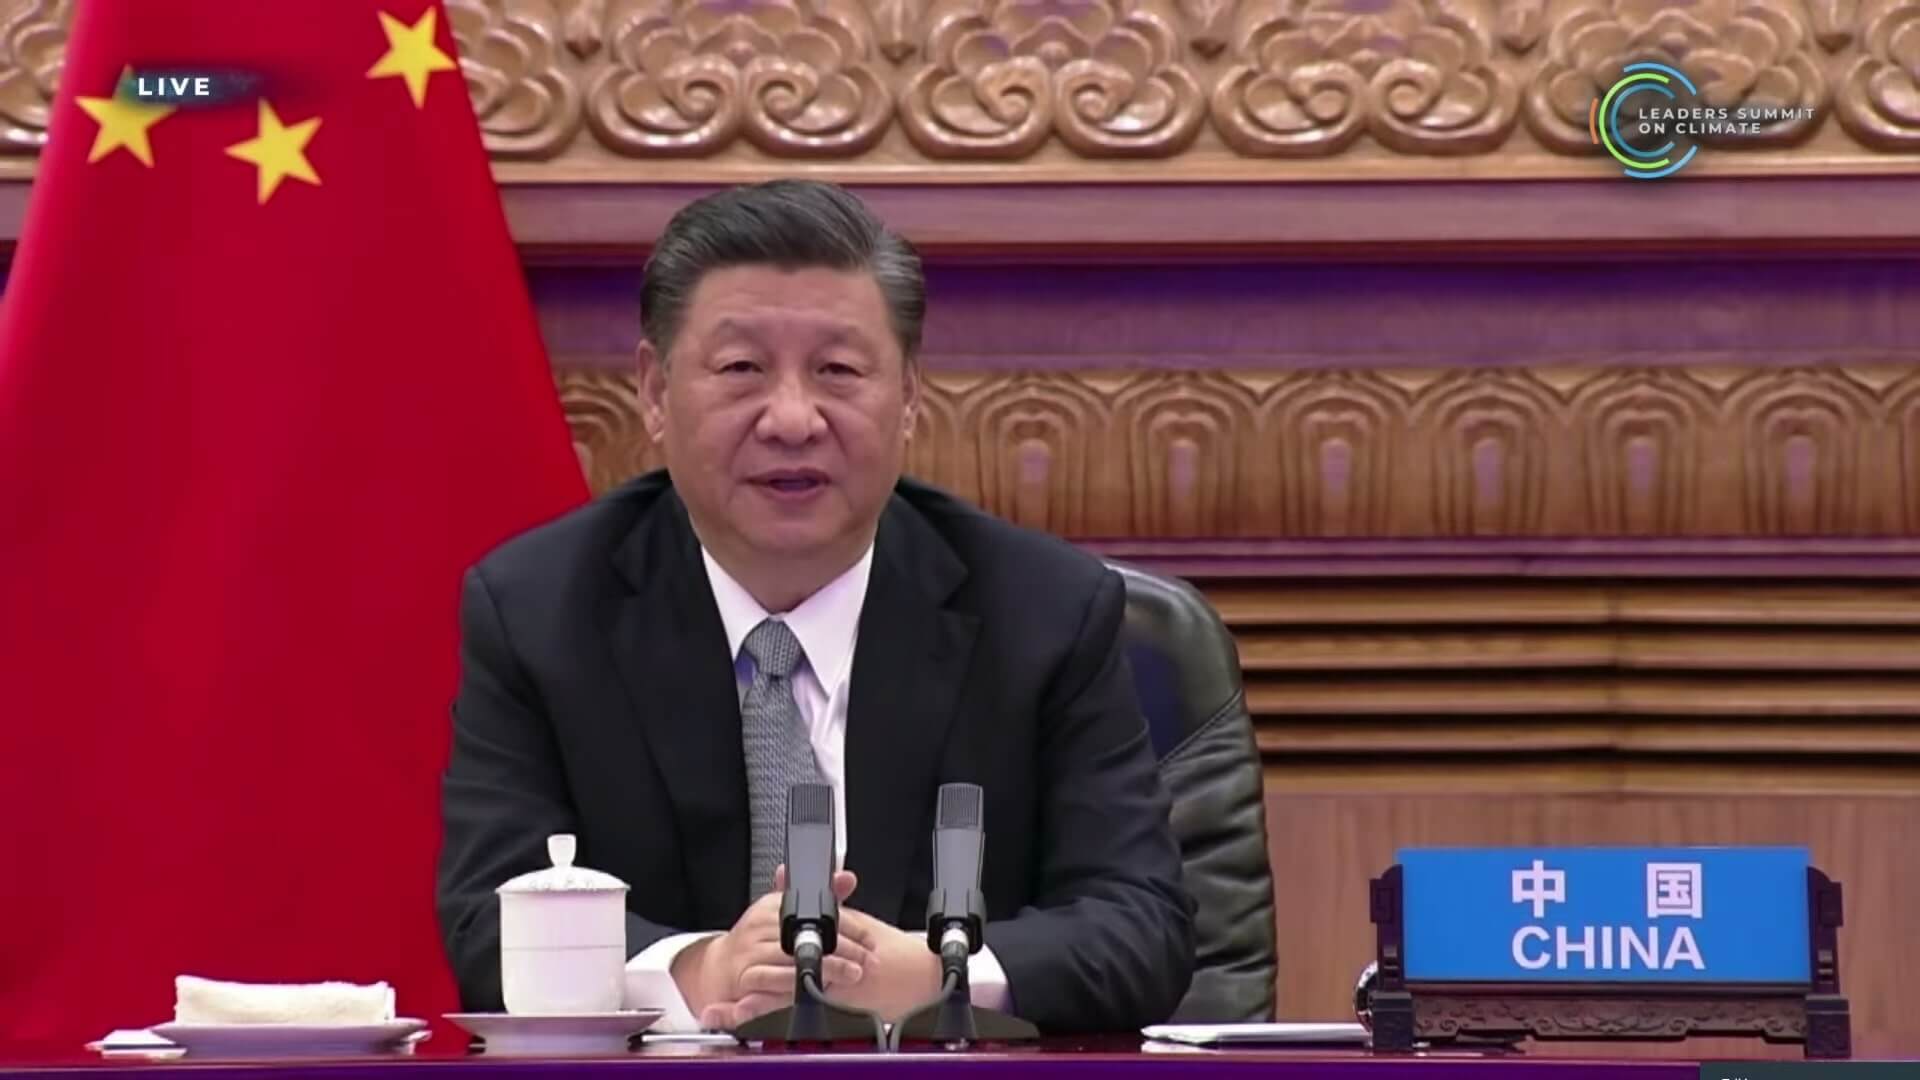 RECAP: Chinese President Xi Jinping’s Address at the Leaders’ Climate Summit